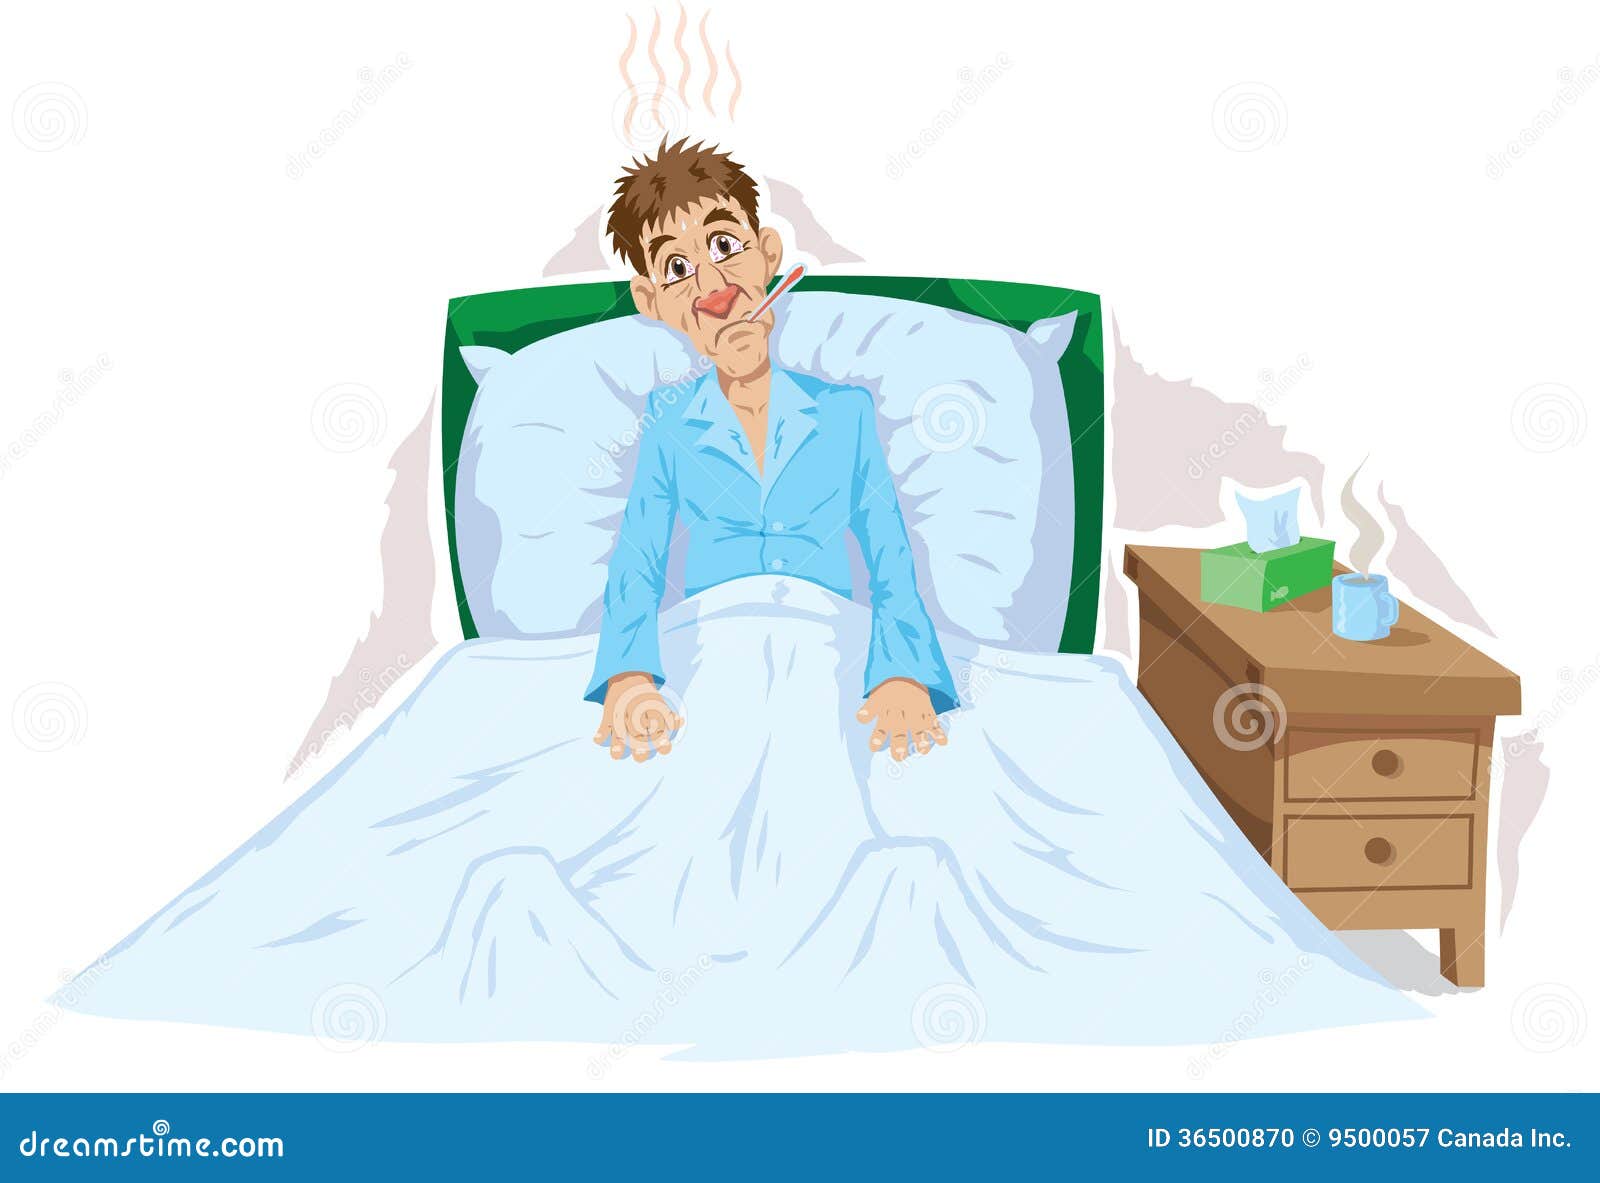 clipart sick man in bed - photo #24